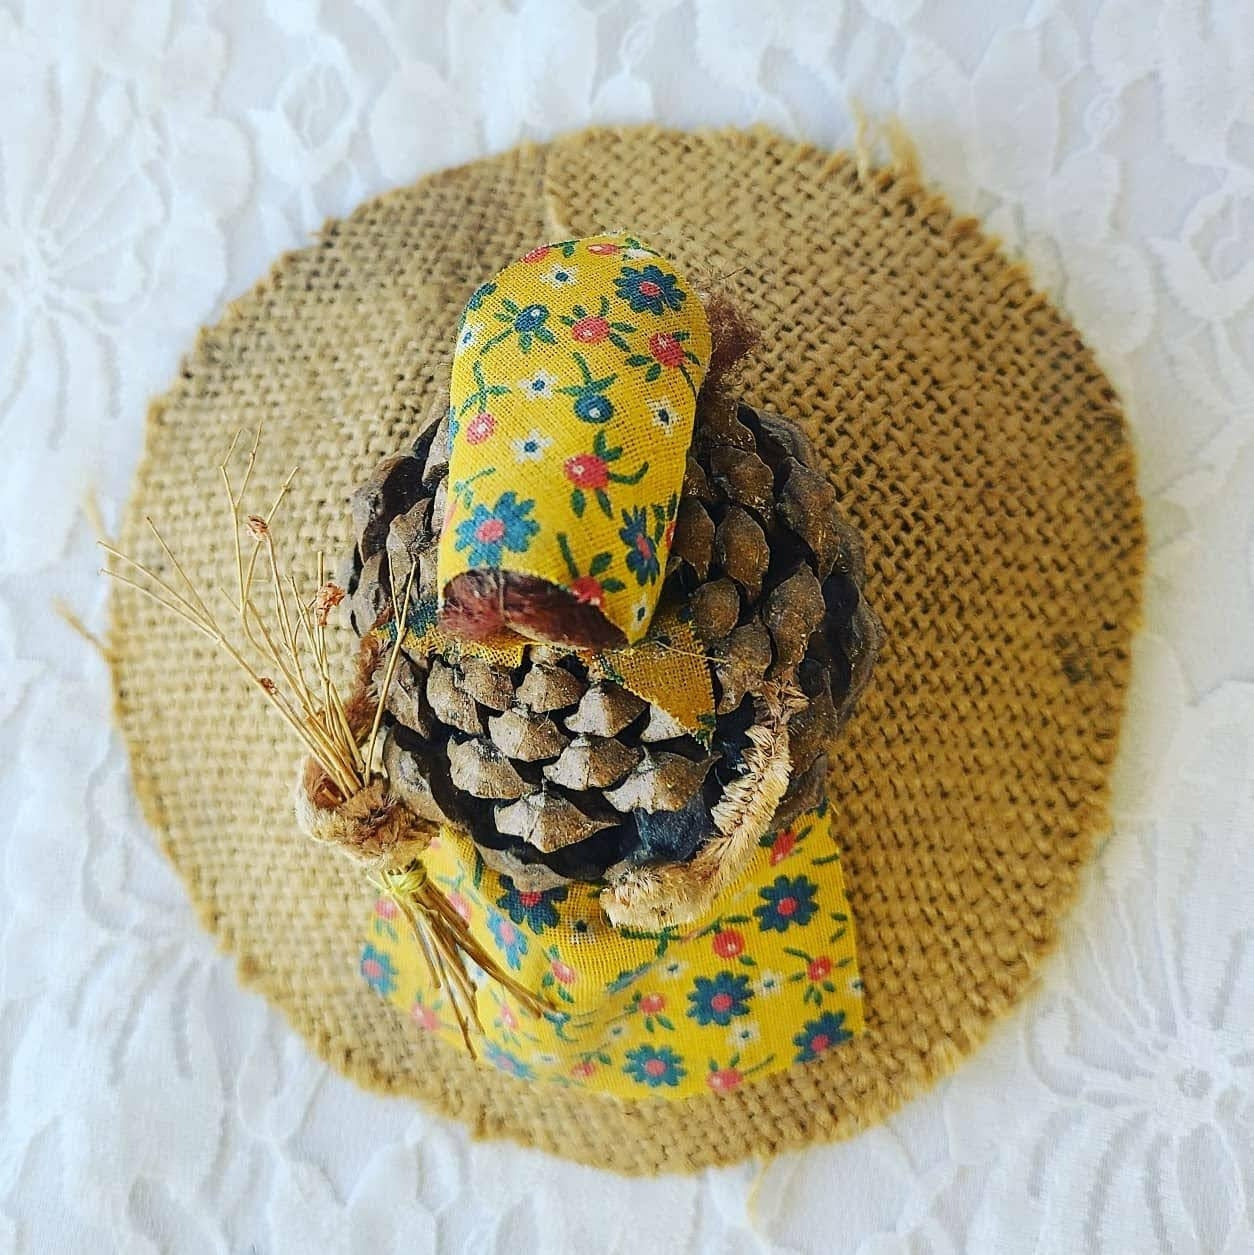 Handmade Pine Cone Doll ~ Prairie Doll ~ Corn Husk Doll ~ Primitive House Blessing Doll ~ 1977 Signed by Artist